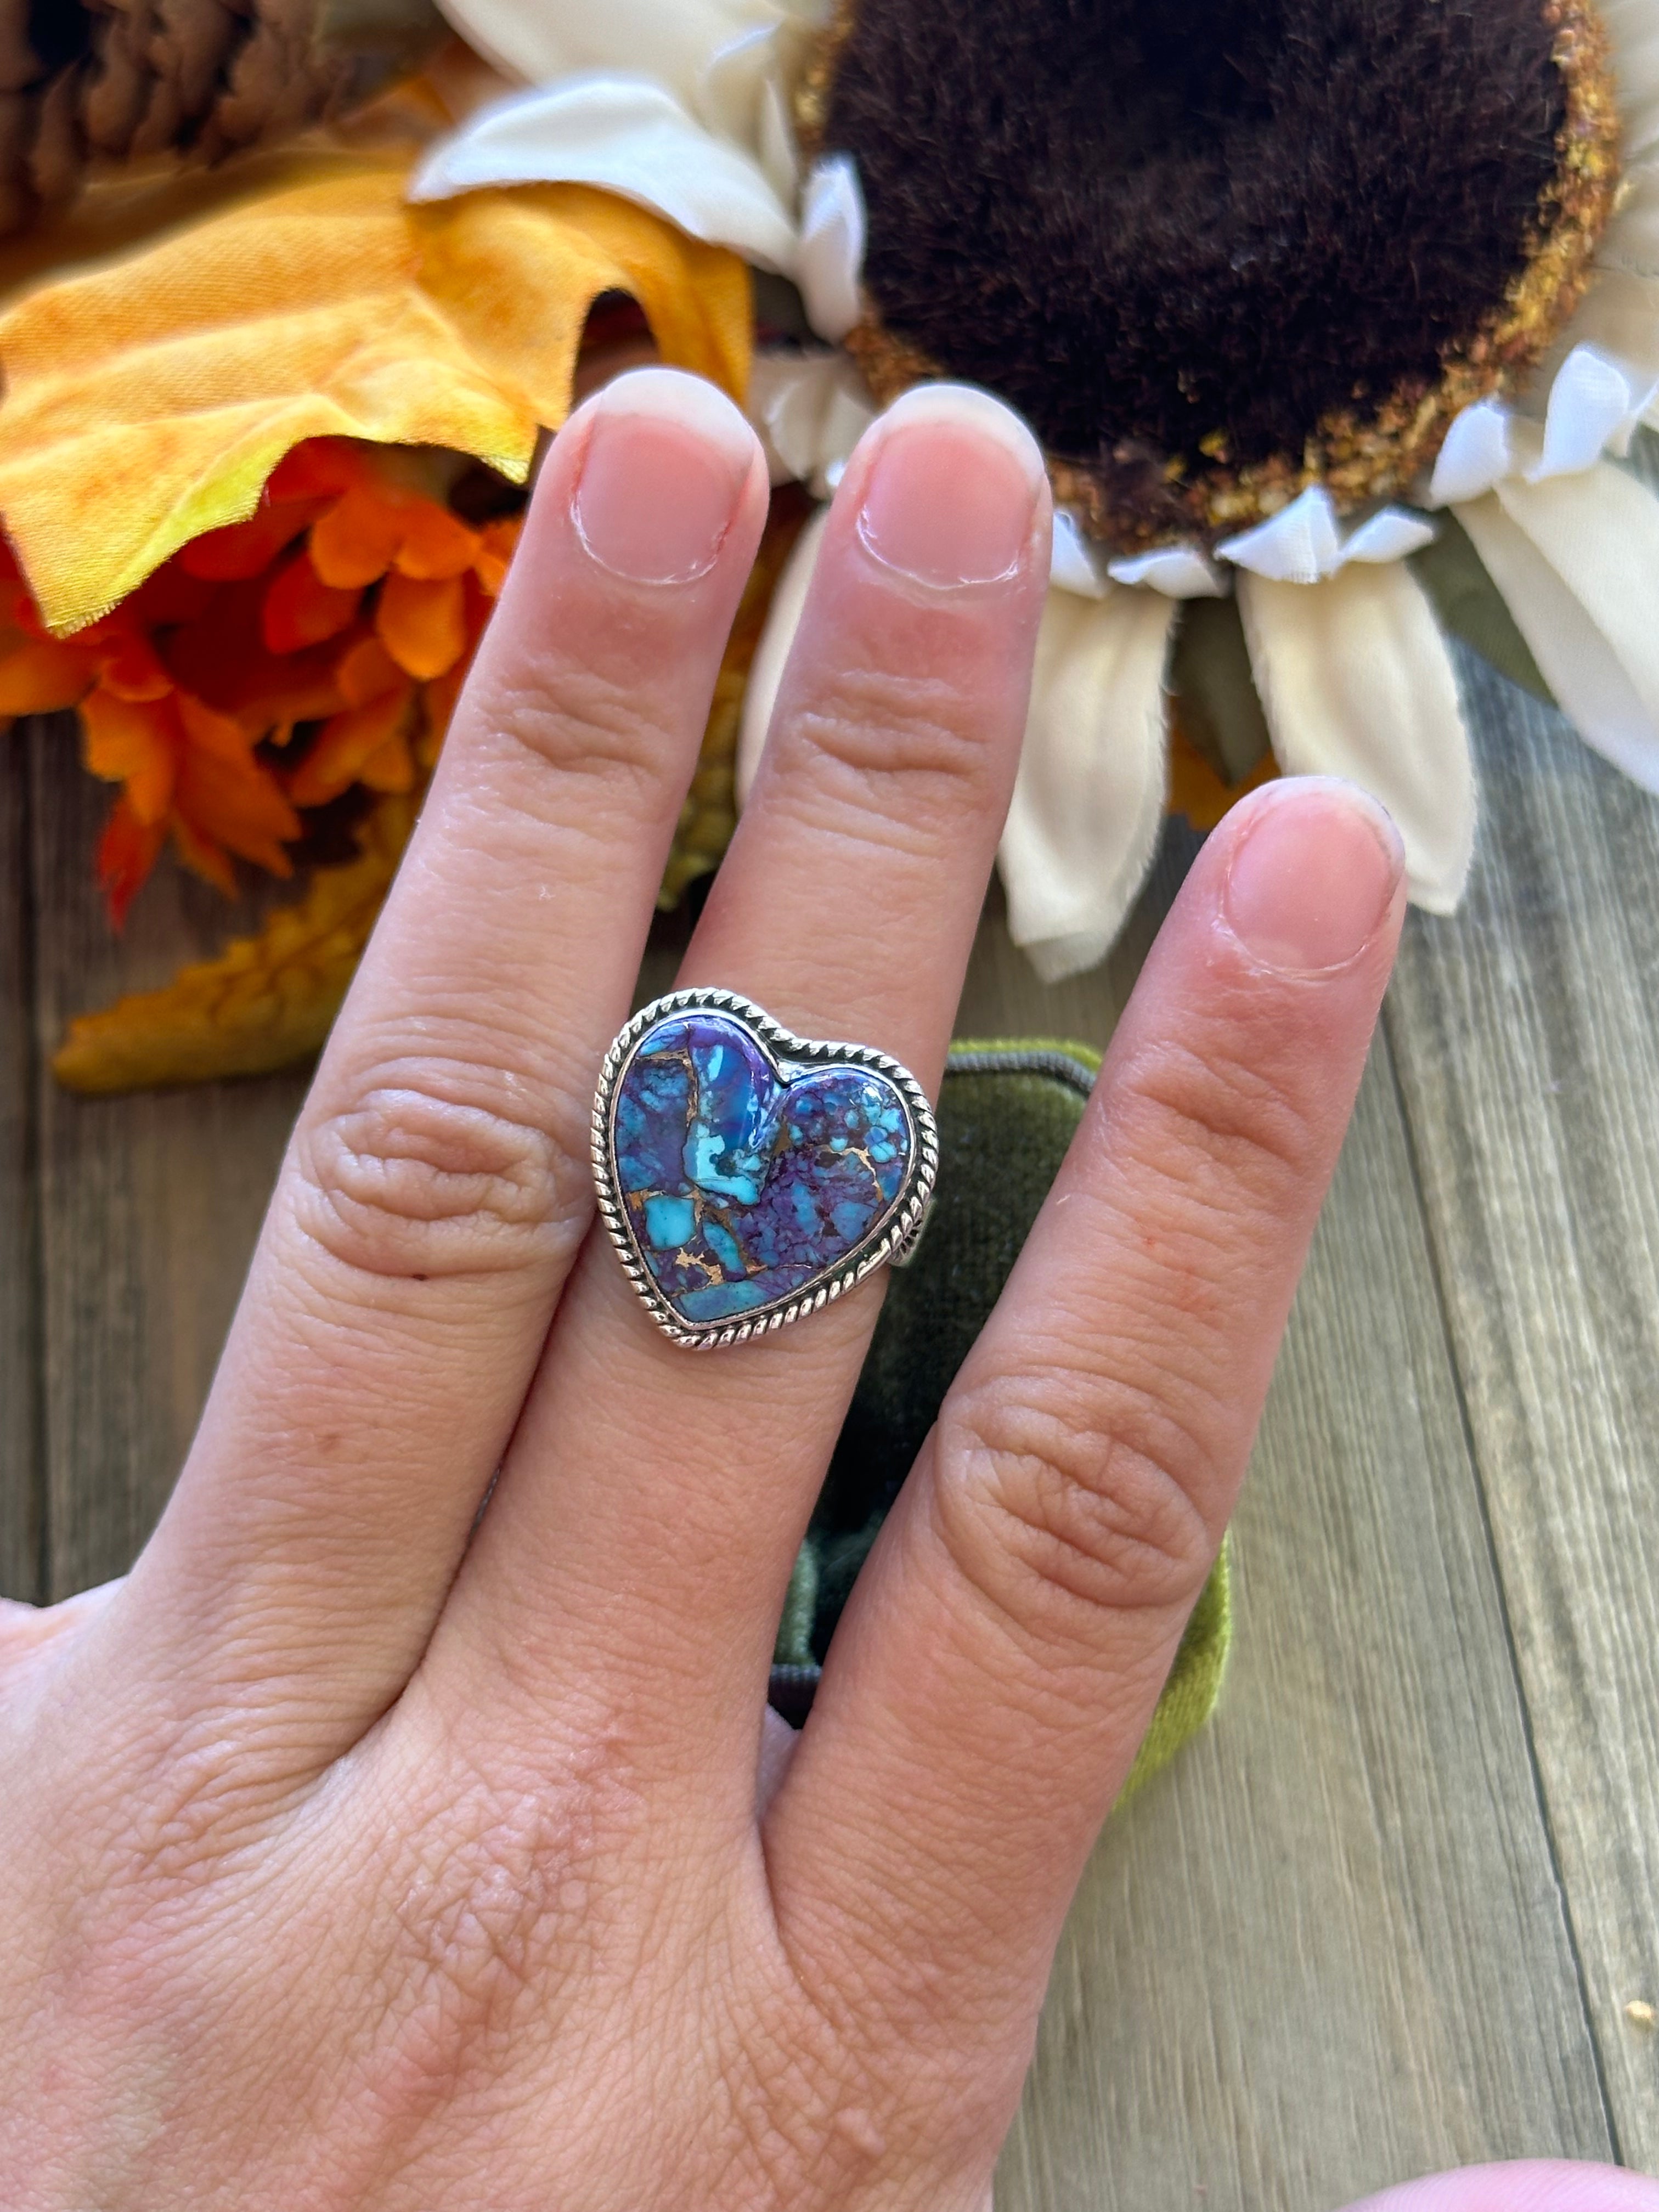 Southwest Handmade Mohave Turquoise & Sterling Silver Adjustable Heart Ring